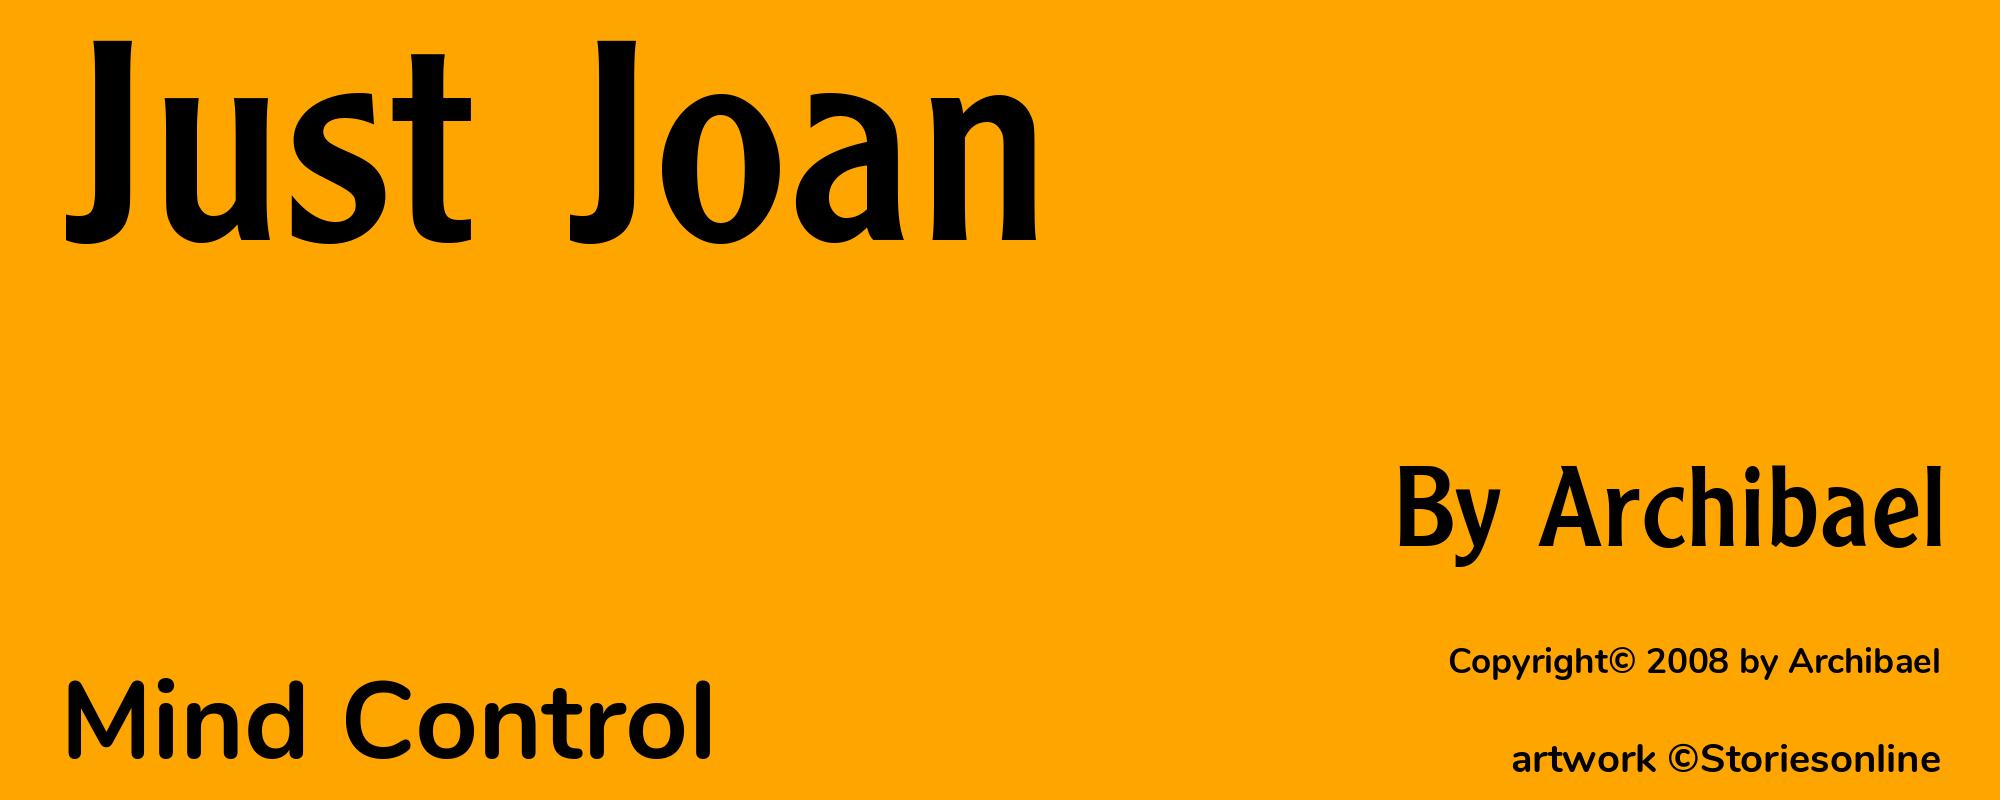 Just Joan - Cover